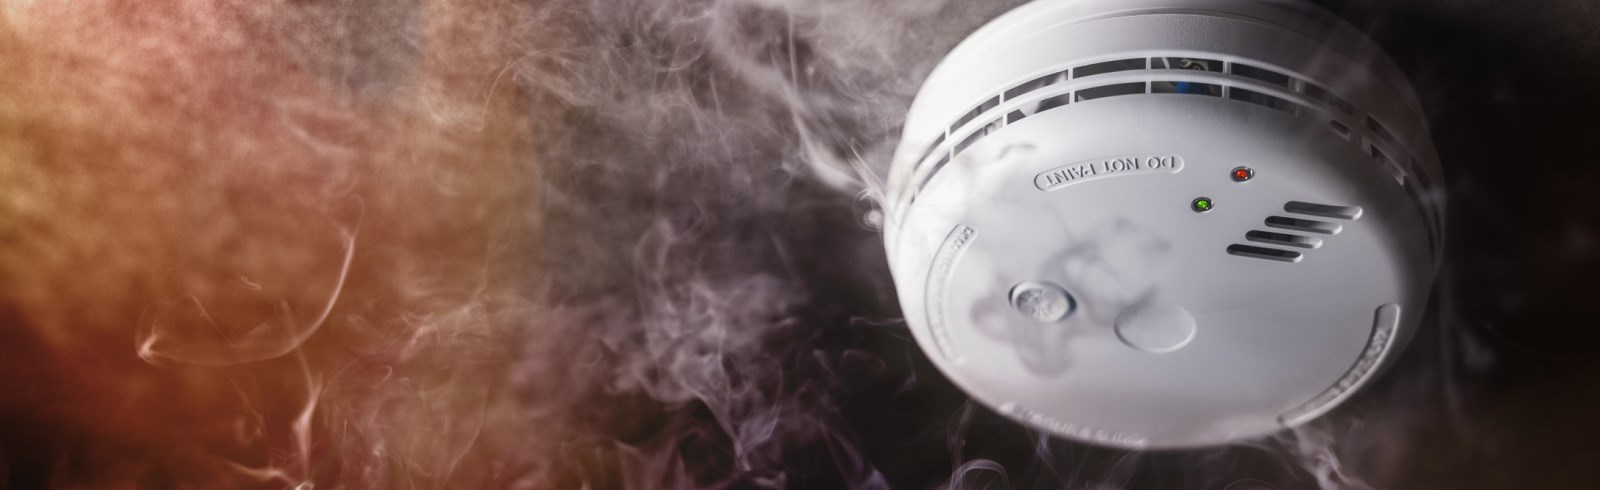 Smoke detector and fire alarm in action background stock photo